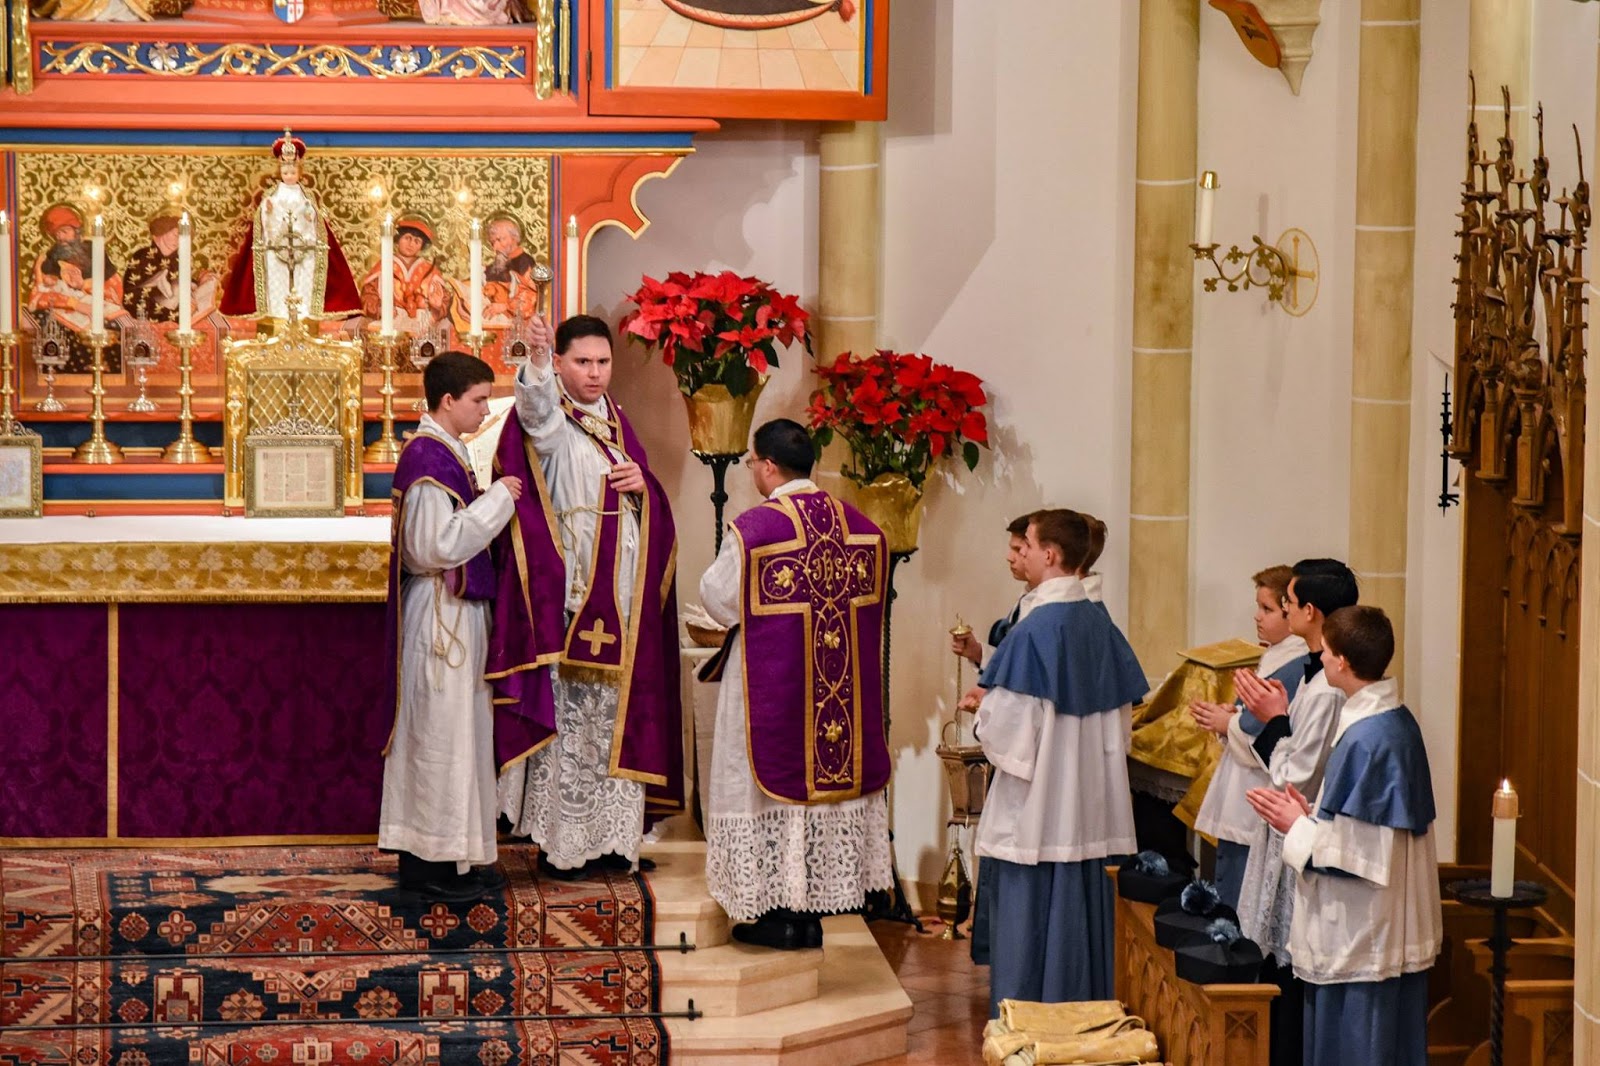 New Liturgical Movement: On the Origins of the Devotion to, and